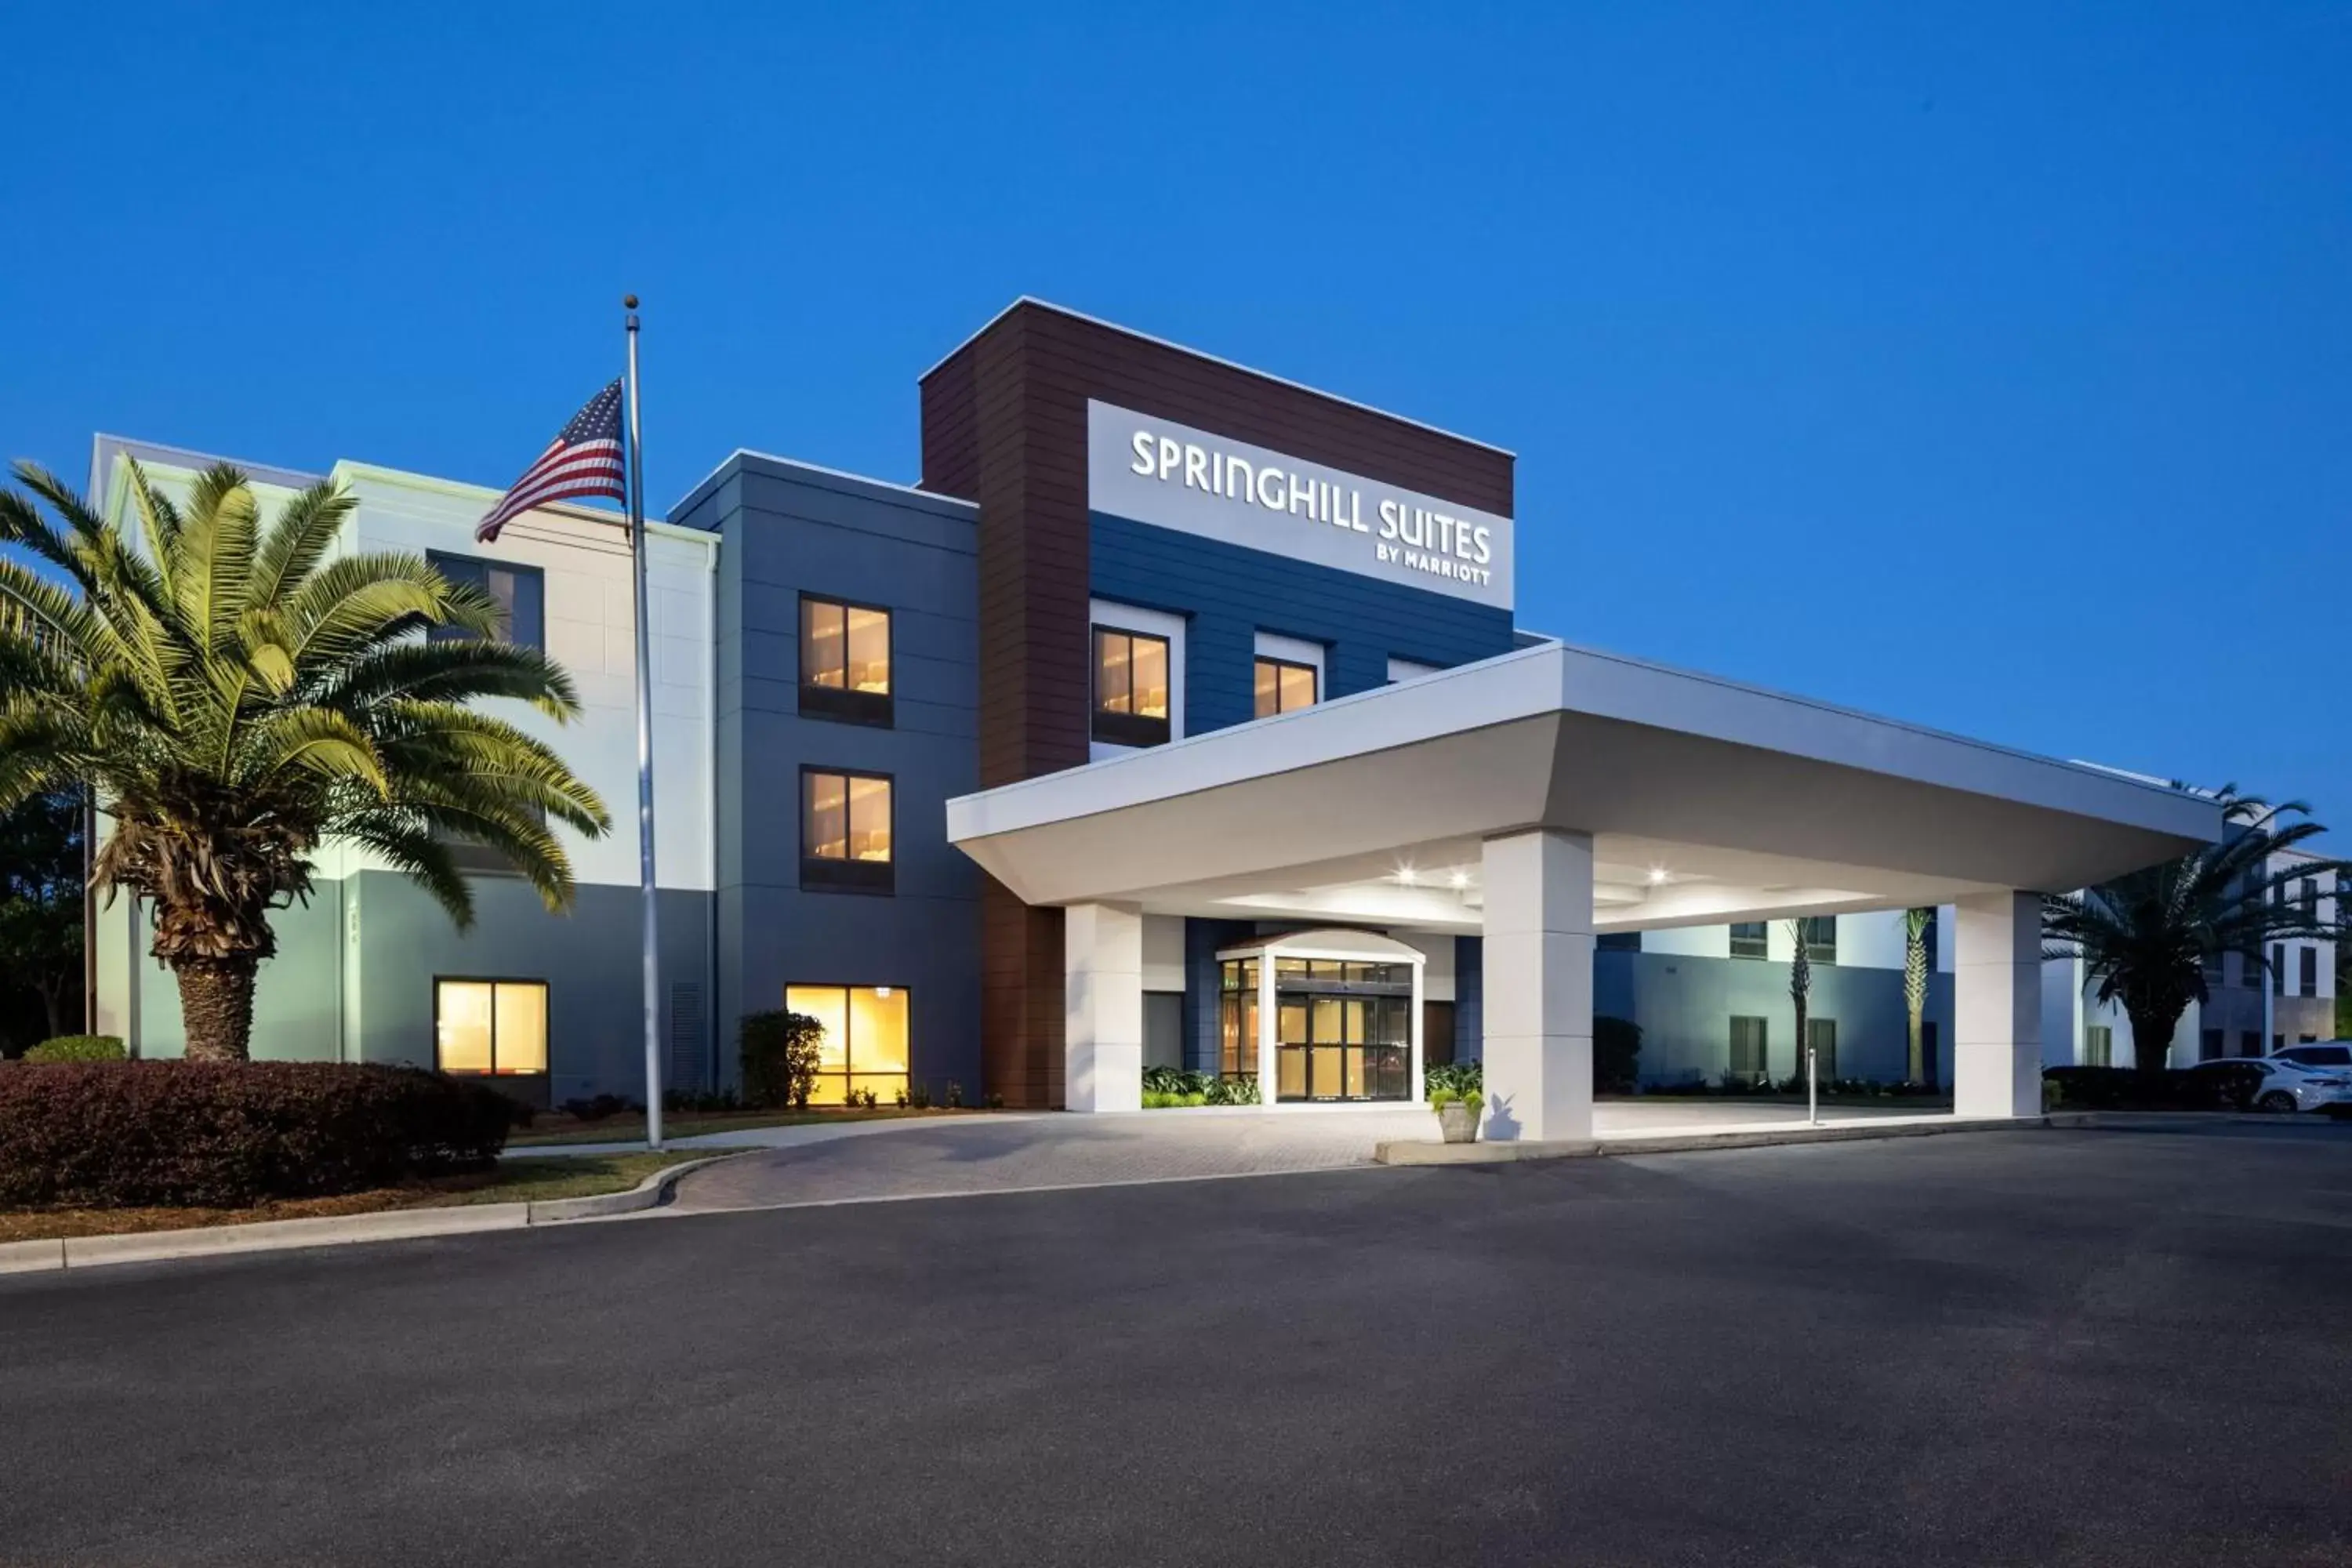 Property Building in SpringHill Suites by Marriott Savannah I-95 South